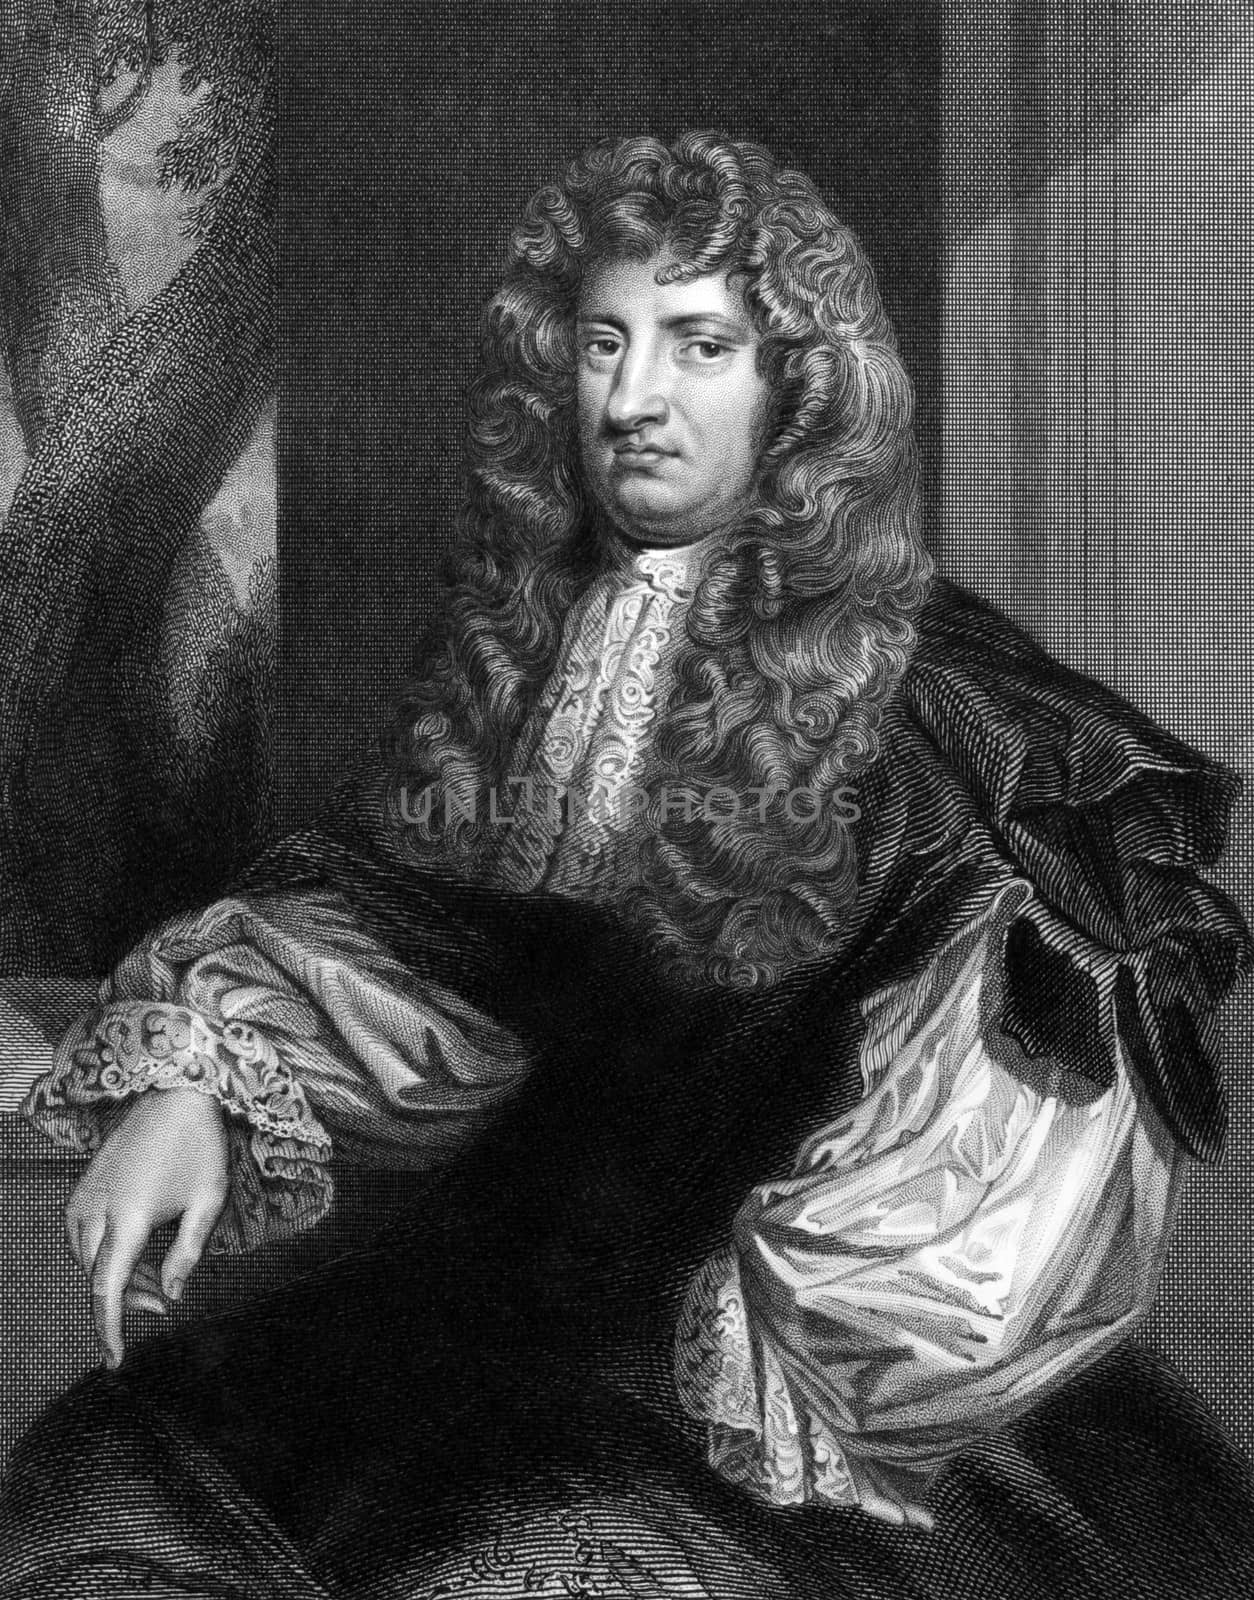 William Russell, Lord Russell (1639-1683) on engraving from 1831. English politician. Engraved by H.Robinson and published in ''Portraits of Illustrious Personages of Great Britain'',UK,1831.